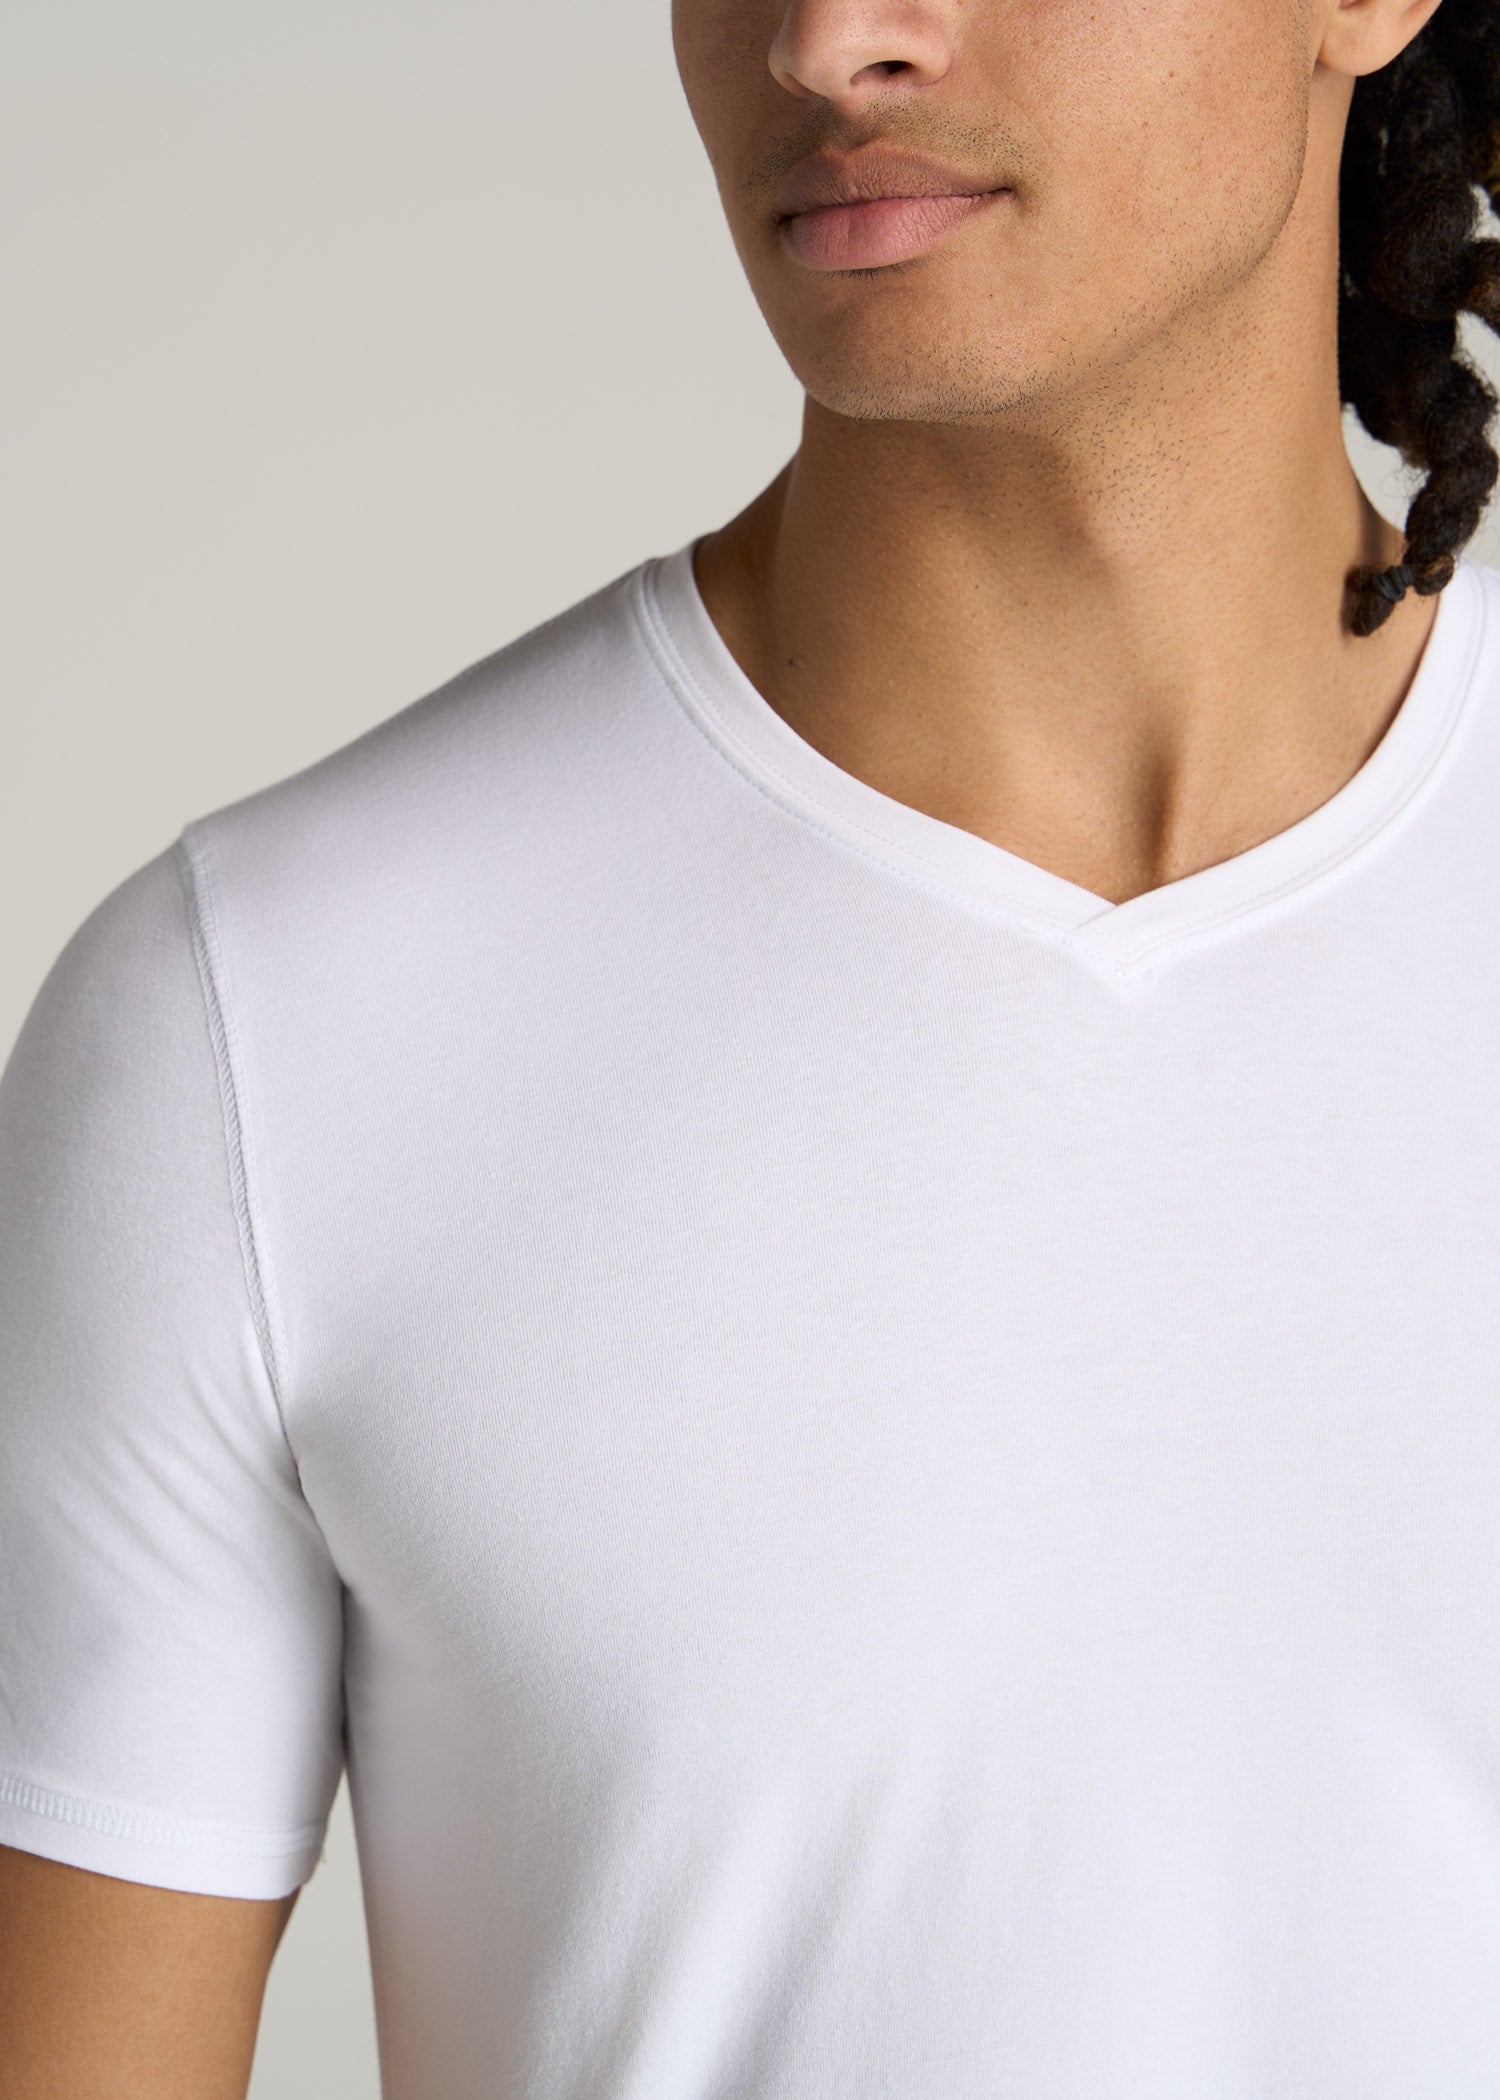 How a T-shirt Should Fit a Man — The Essential Man